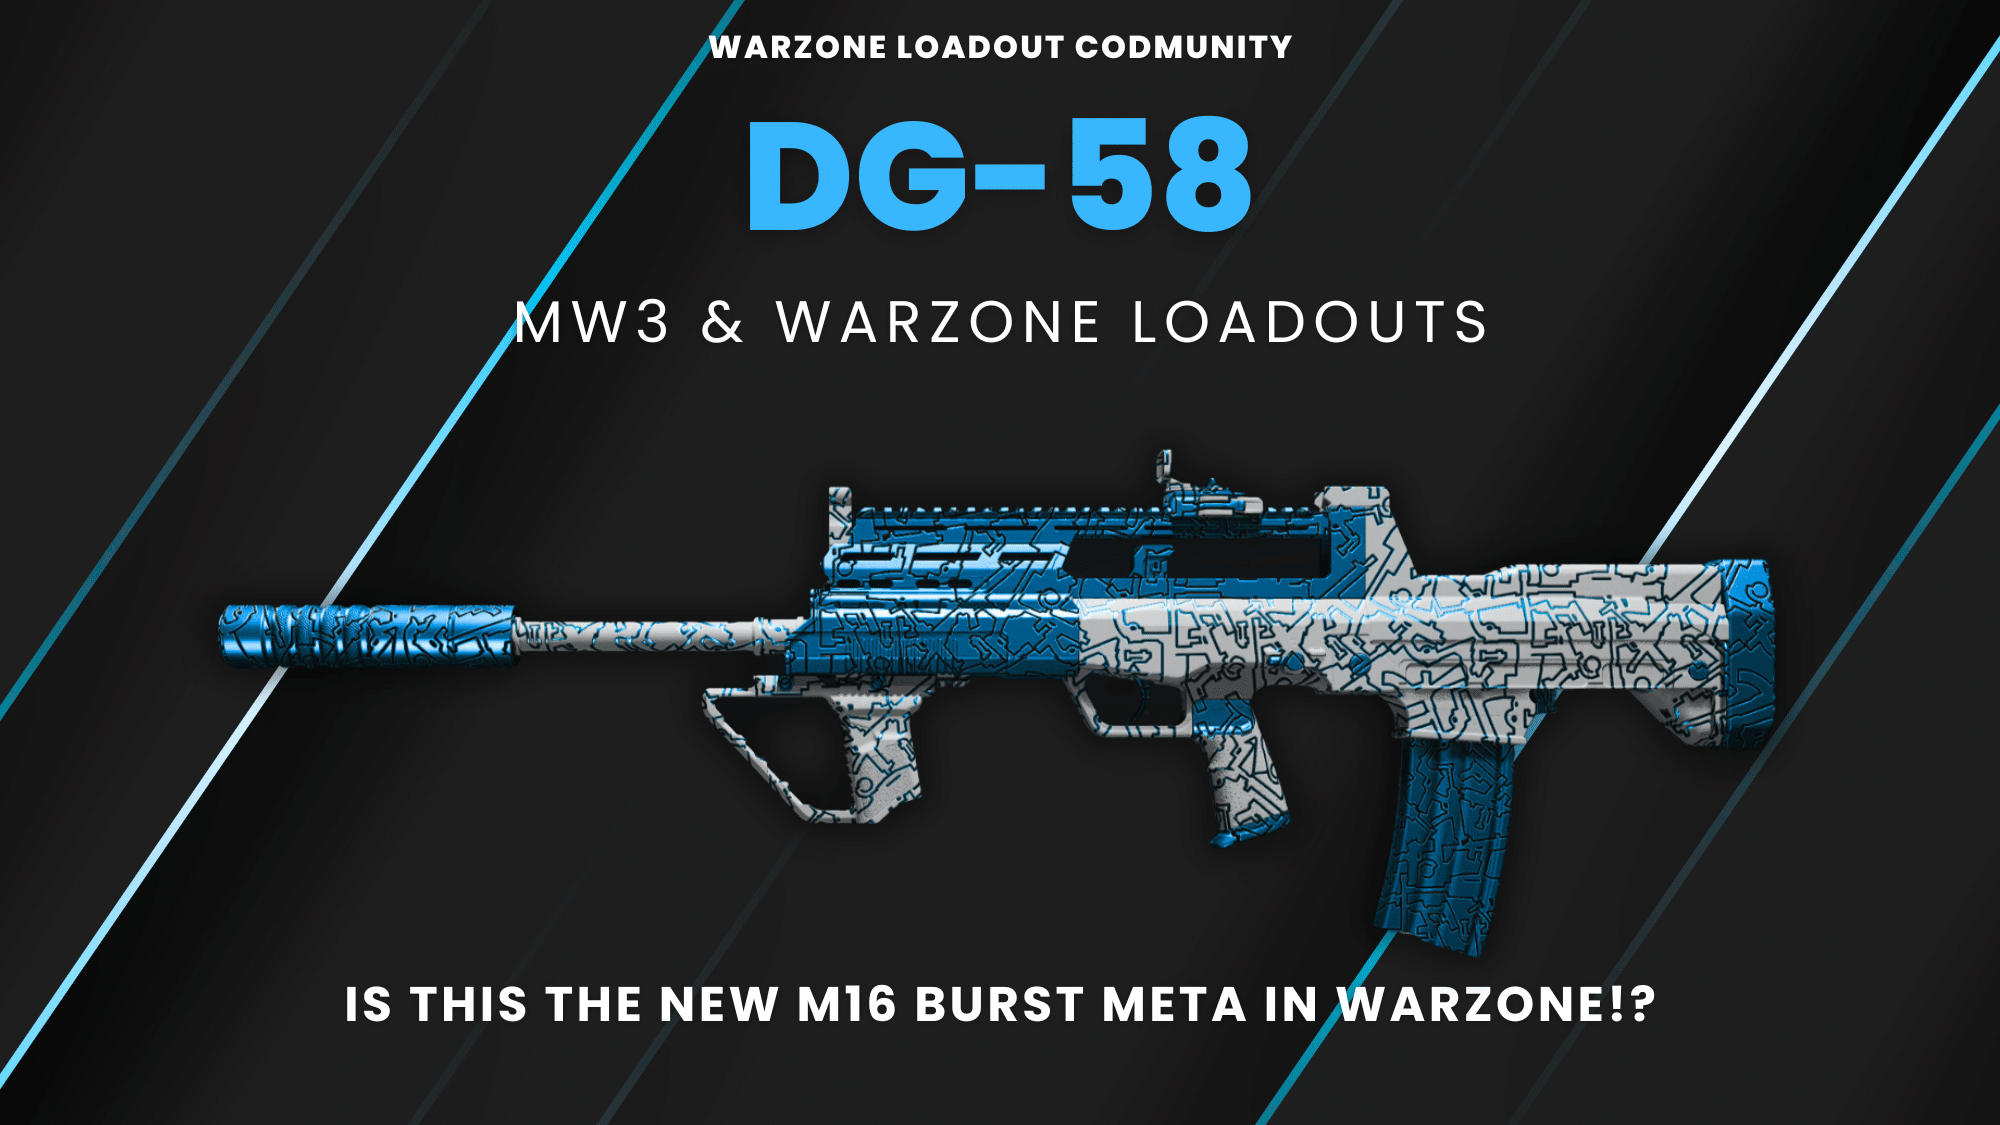 DG-58 Best Loadouts and Builds for MW3, Zombies, and upcoming Warzone&#039;s Meta Burst!